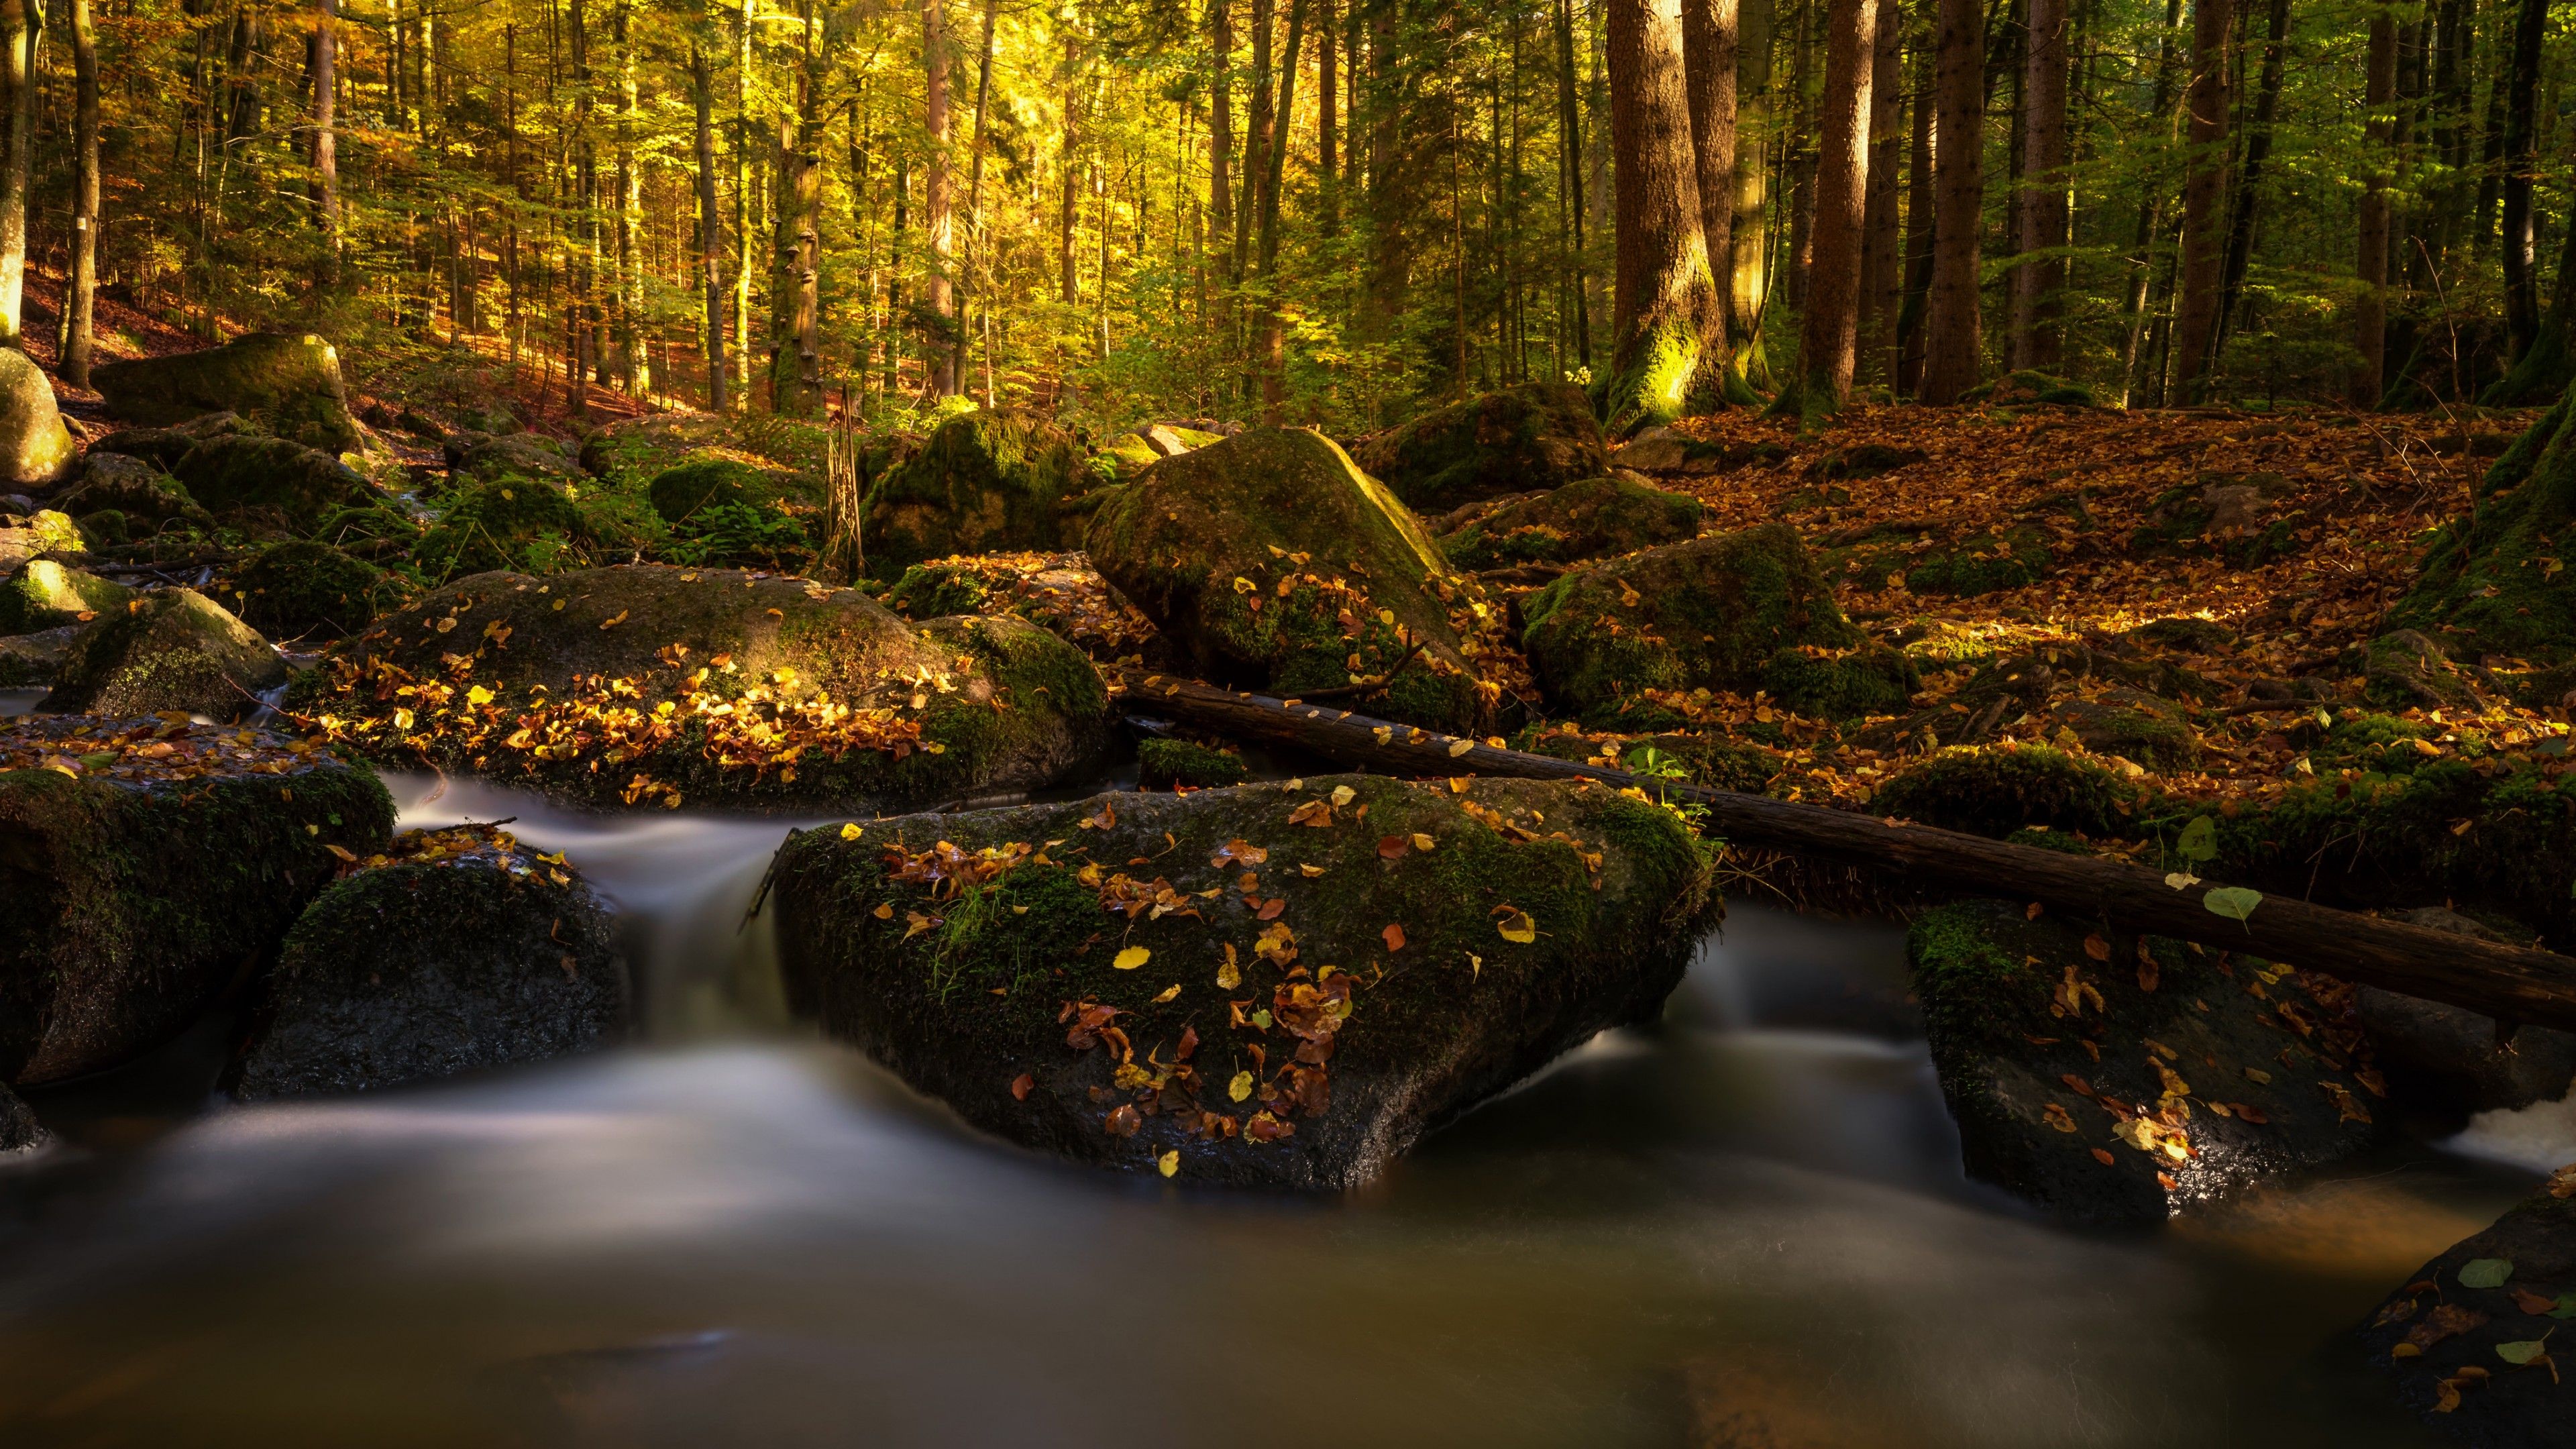 Forest 4K Wallpaper, Autumn, Fall Foliage, Autumn leaves, Water stream, Bavaria, Germany, Nature